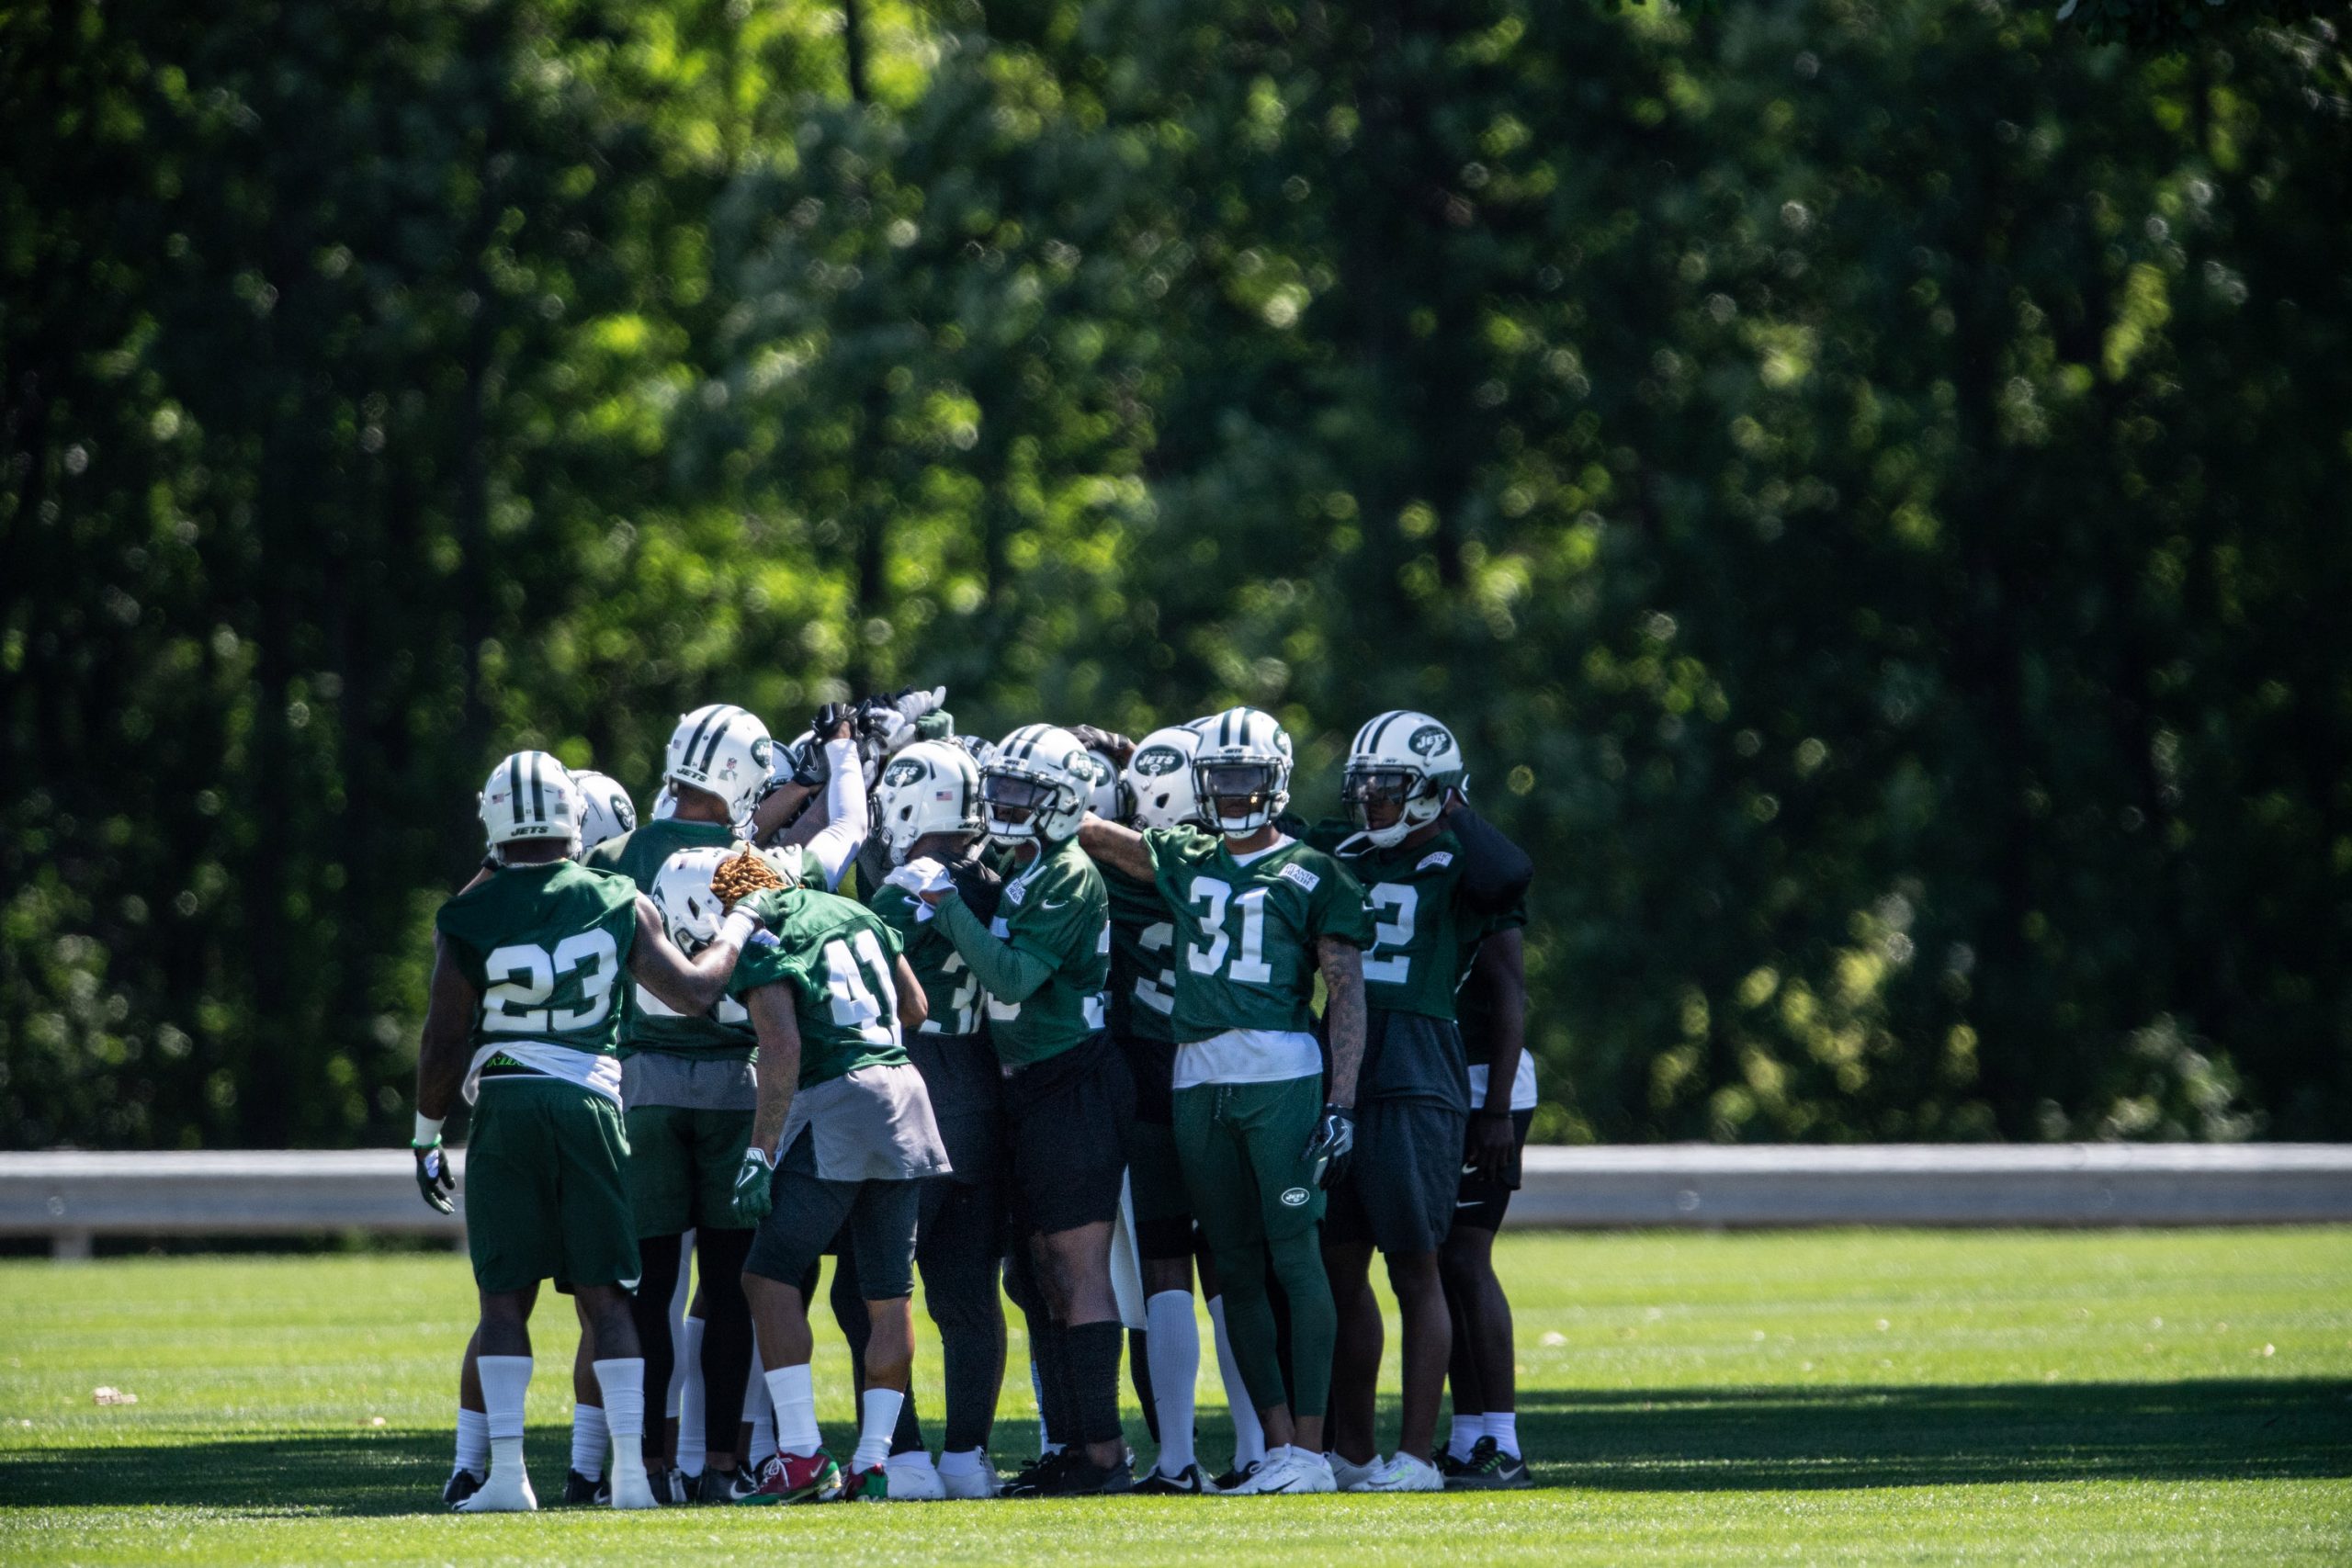 The New York Jets work out during the NFL offseason.